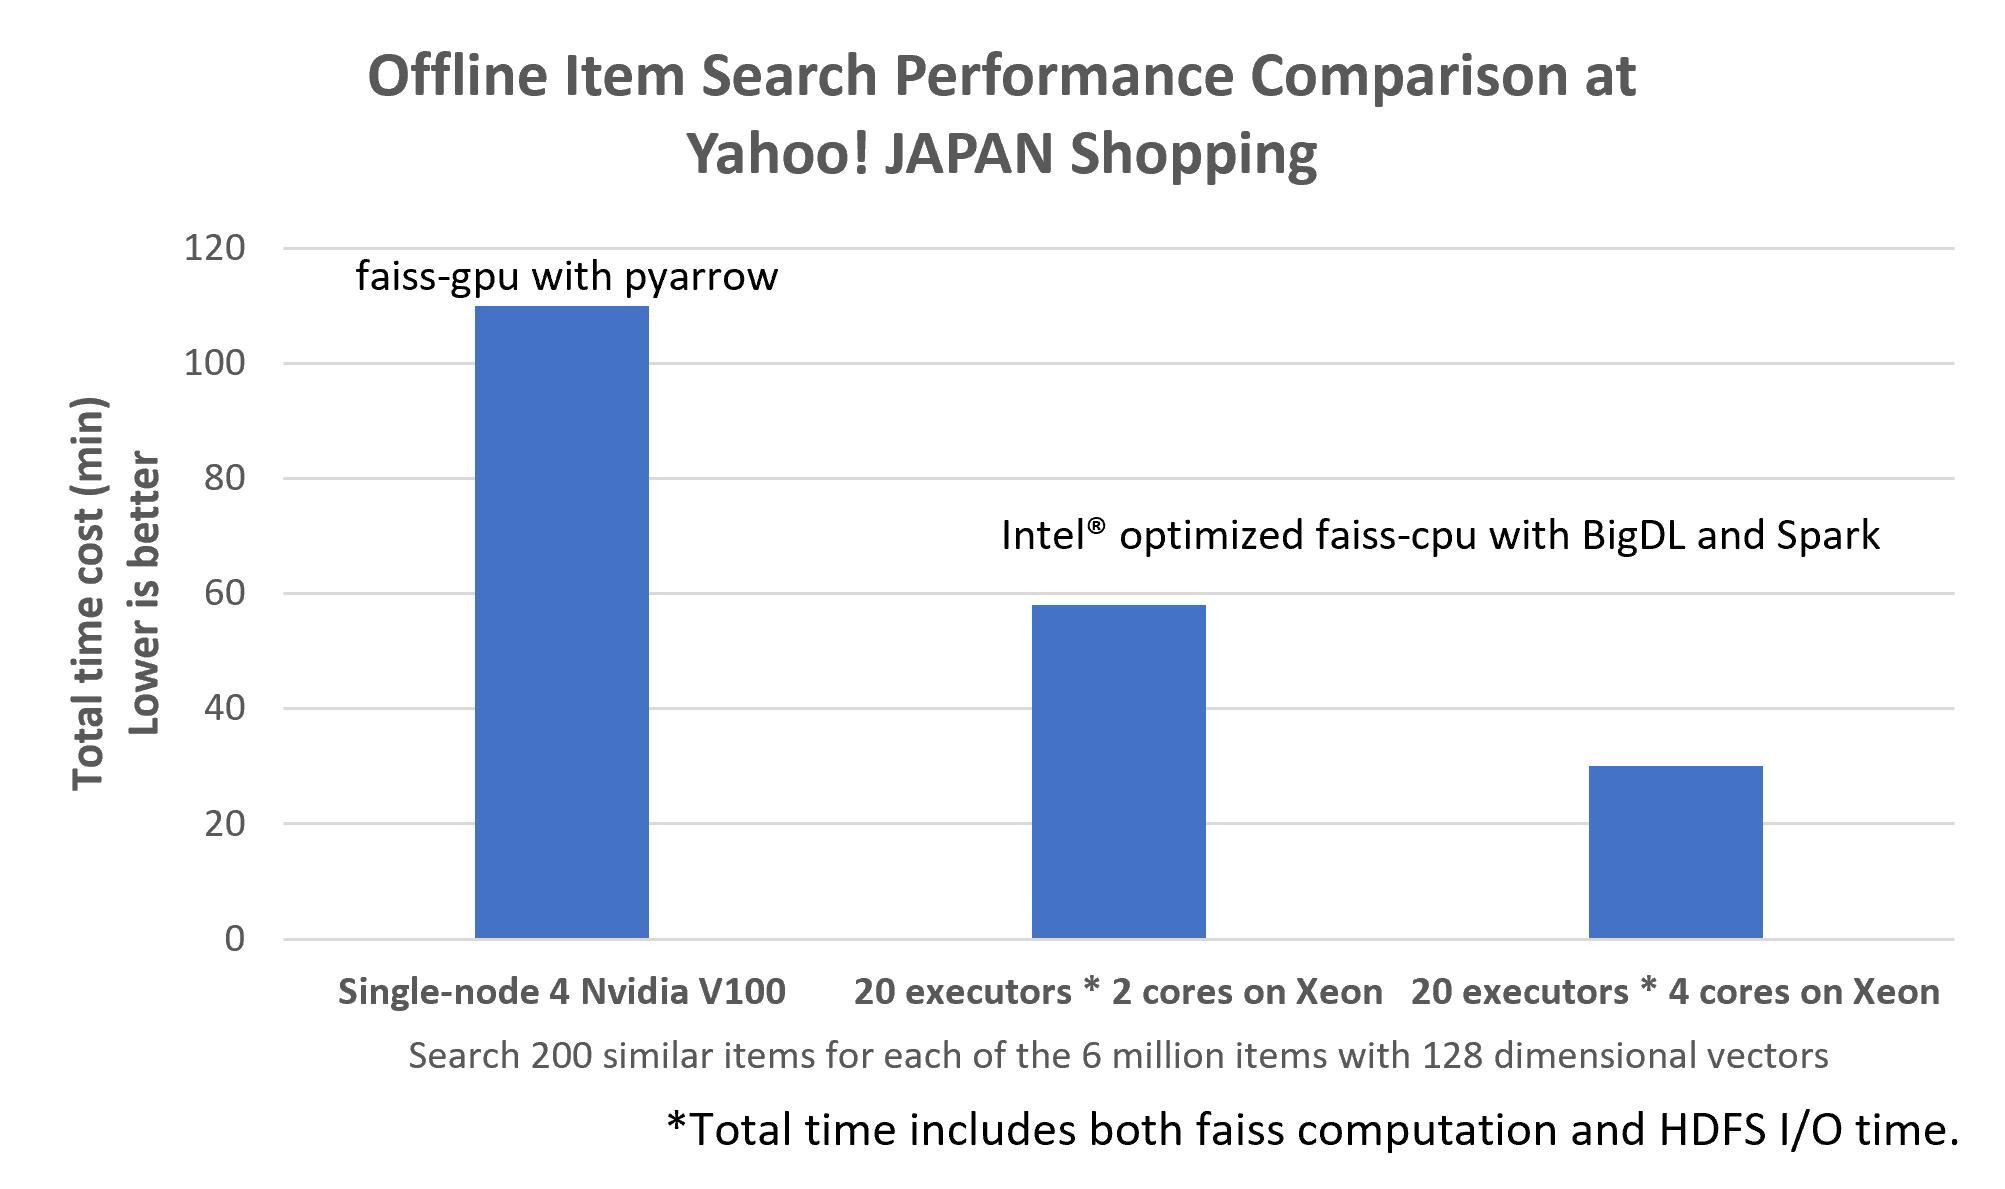 Offline Item Search Performance Comparison Results